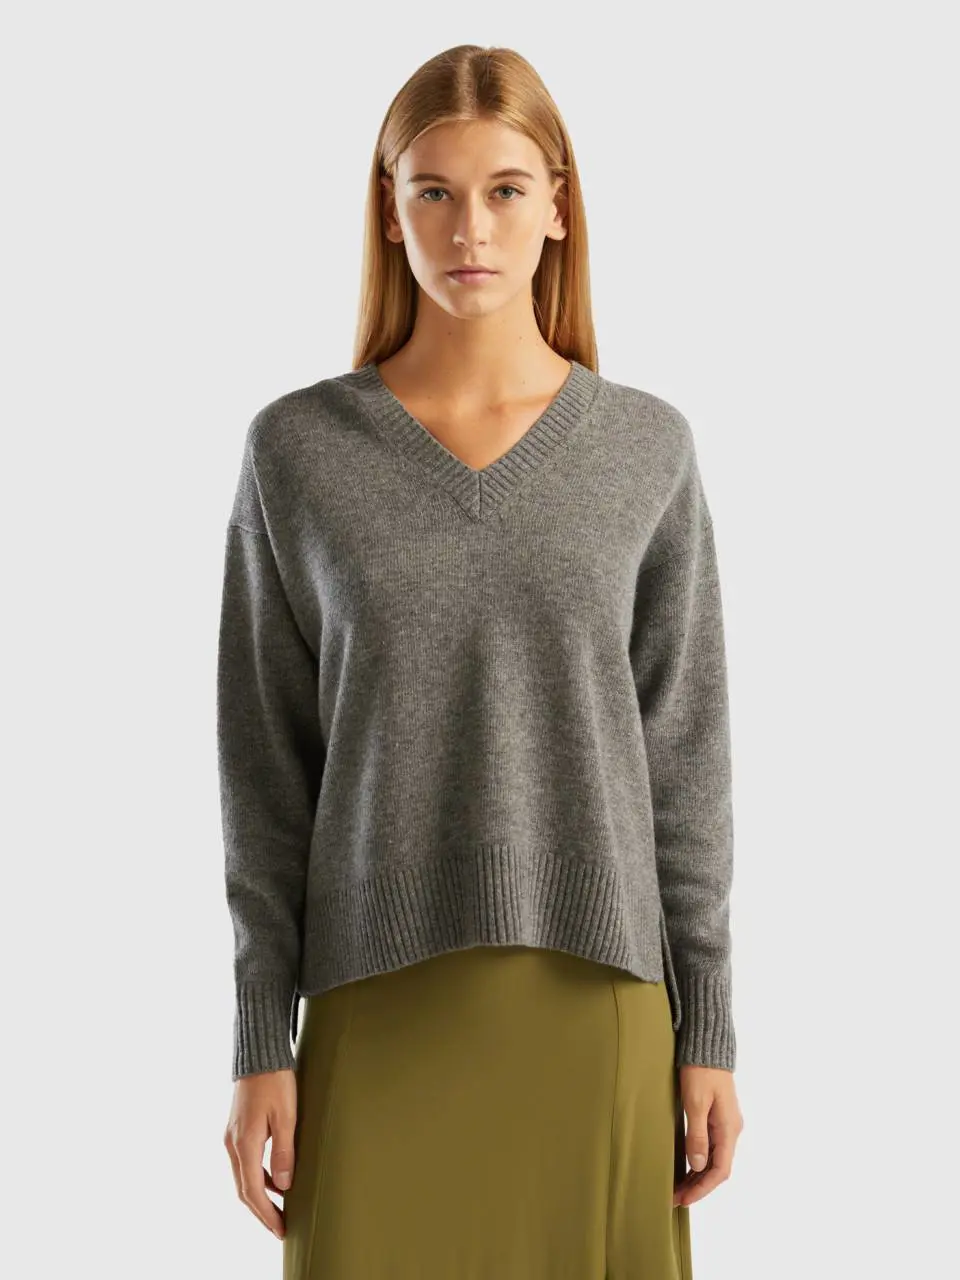 Benetton oversized fit sweater with slits. 1